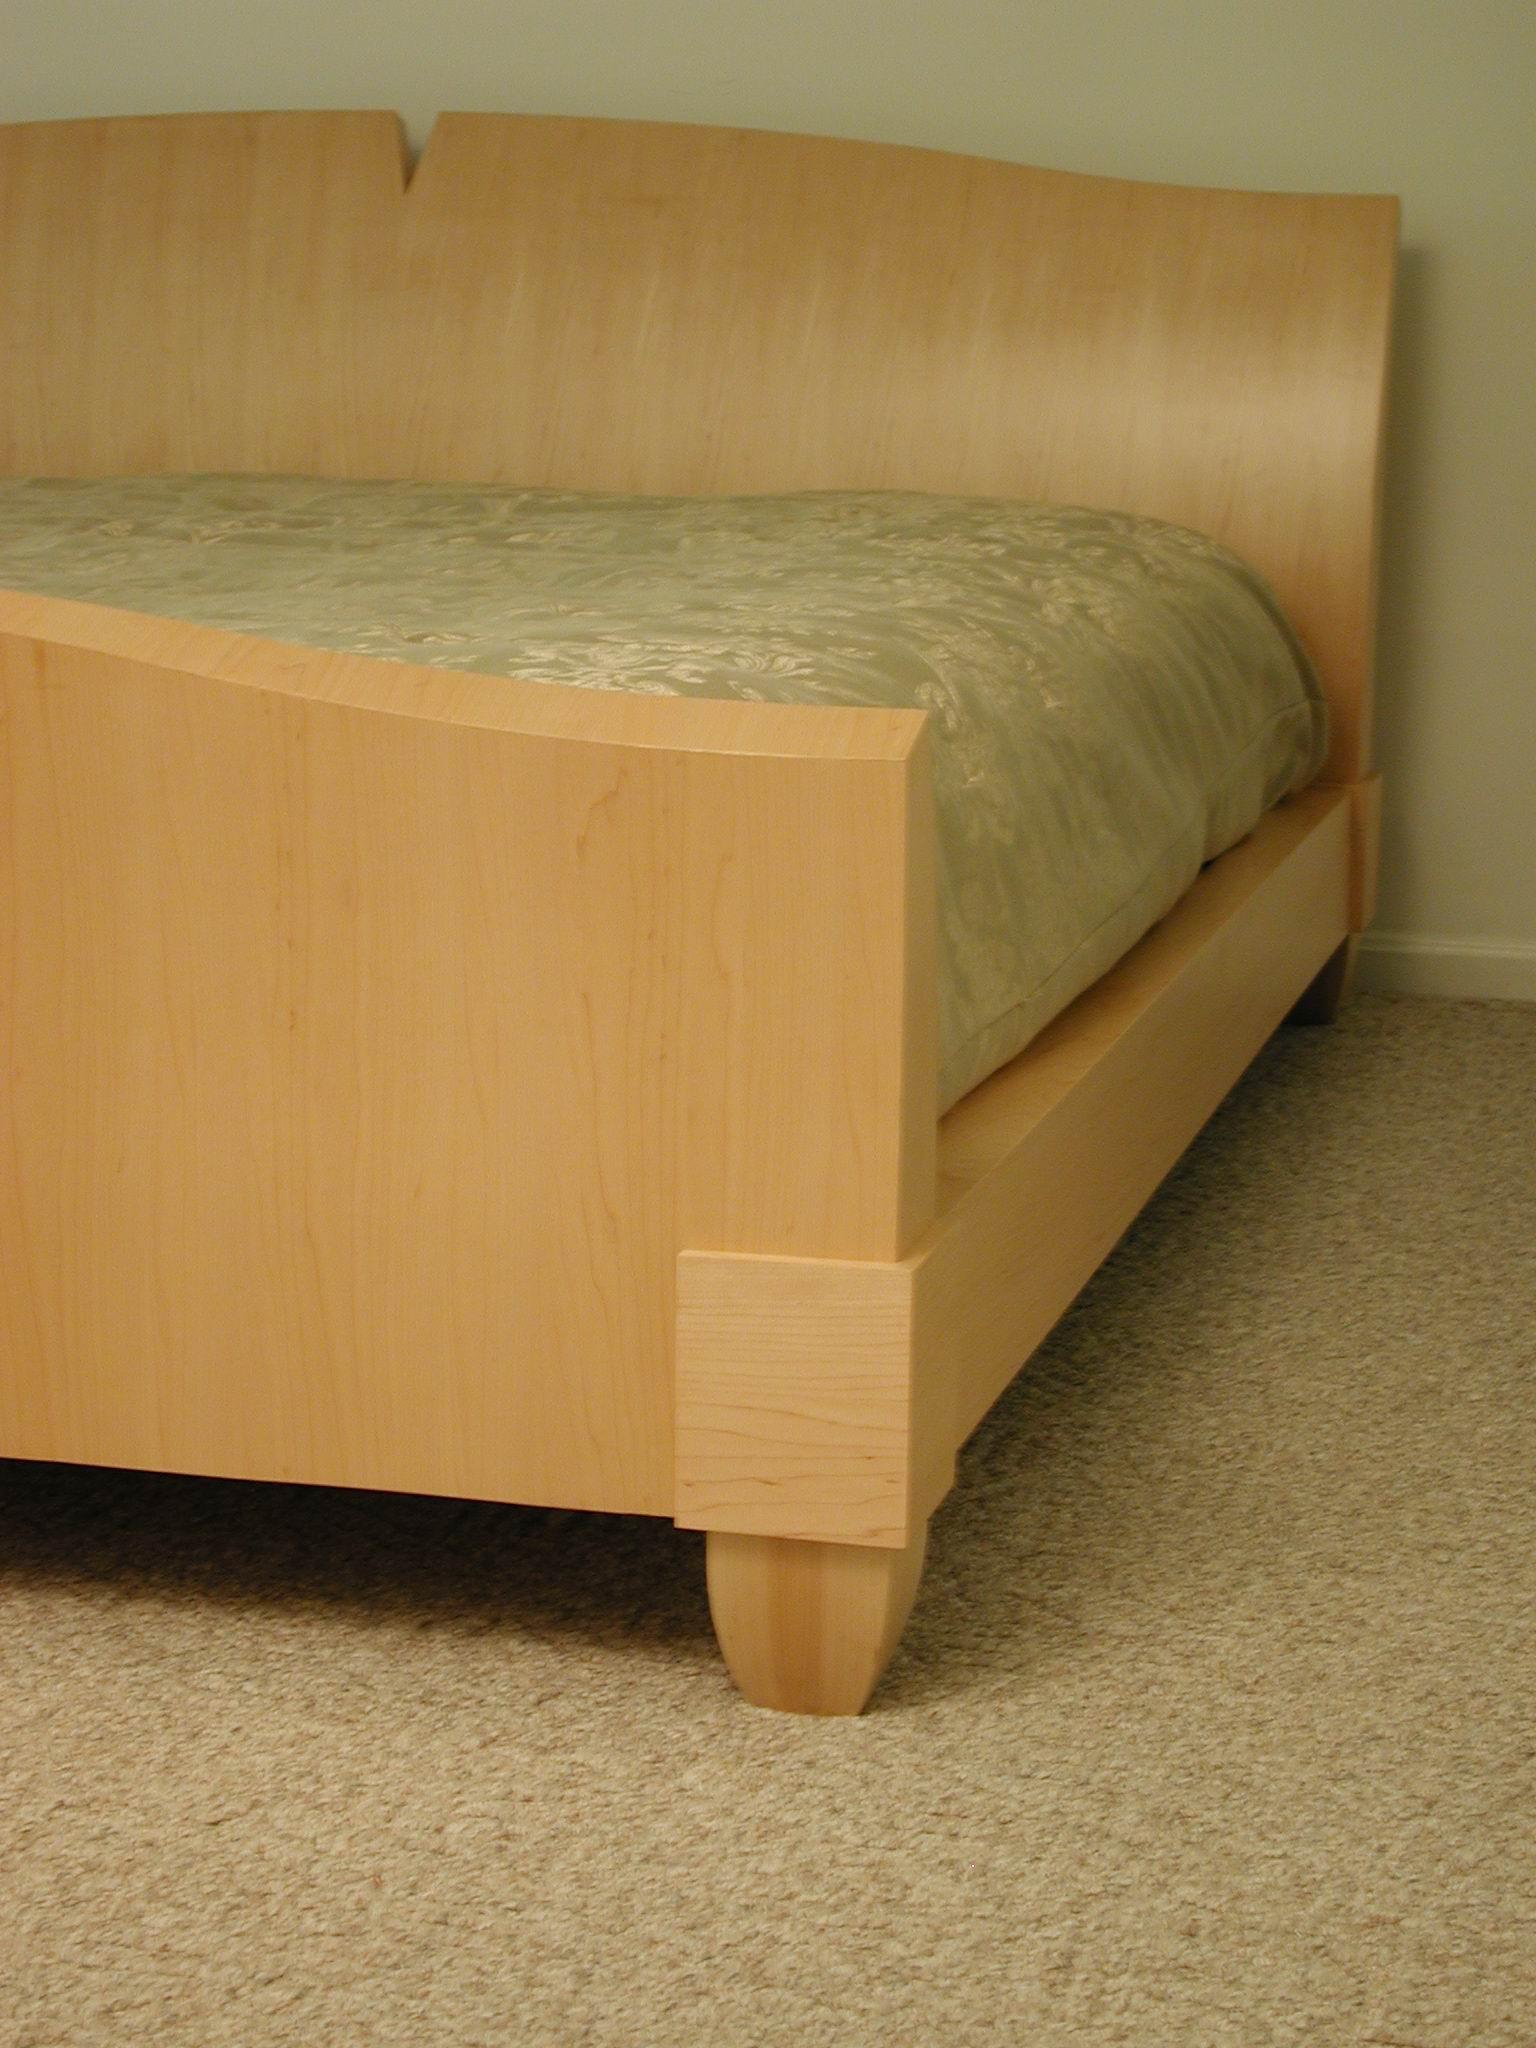 The Antilles Bed is a king sized platform bed and does not require a box spring. It is shown in natural maple open grain finish. The bed can be made to fit a queen sized bed as well other materials. 

All our work is signed, dated, and made to